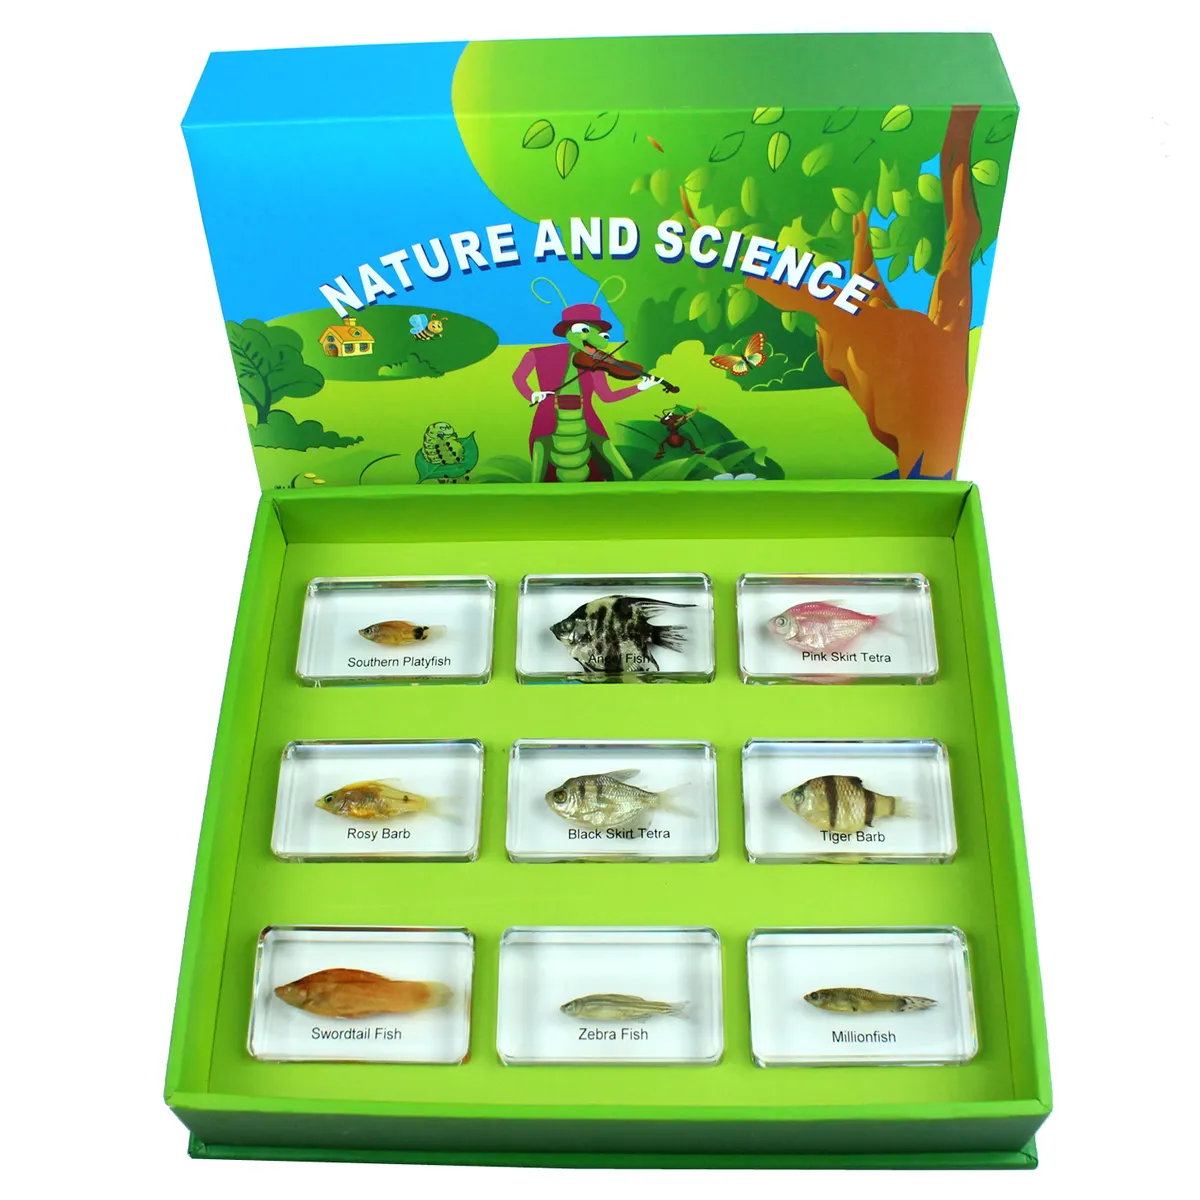 Insect Specimen Kit Biological Educational Equipment School Teaching Resources Learning Natural